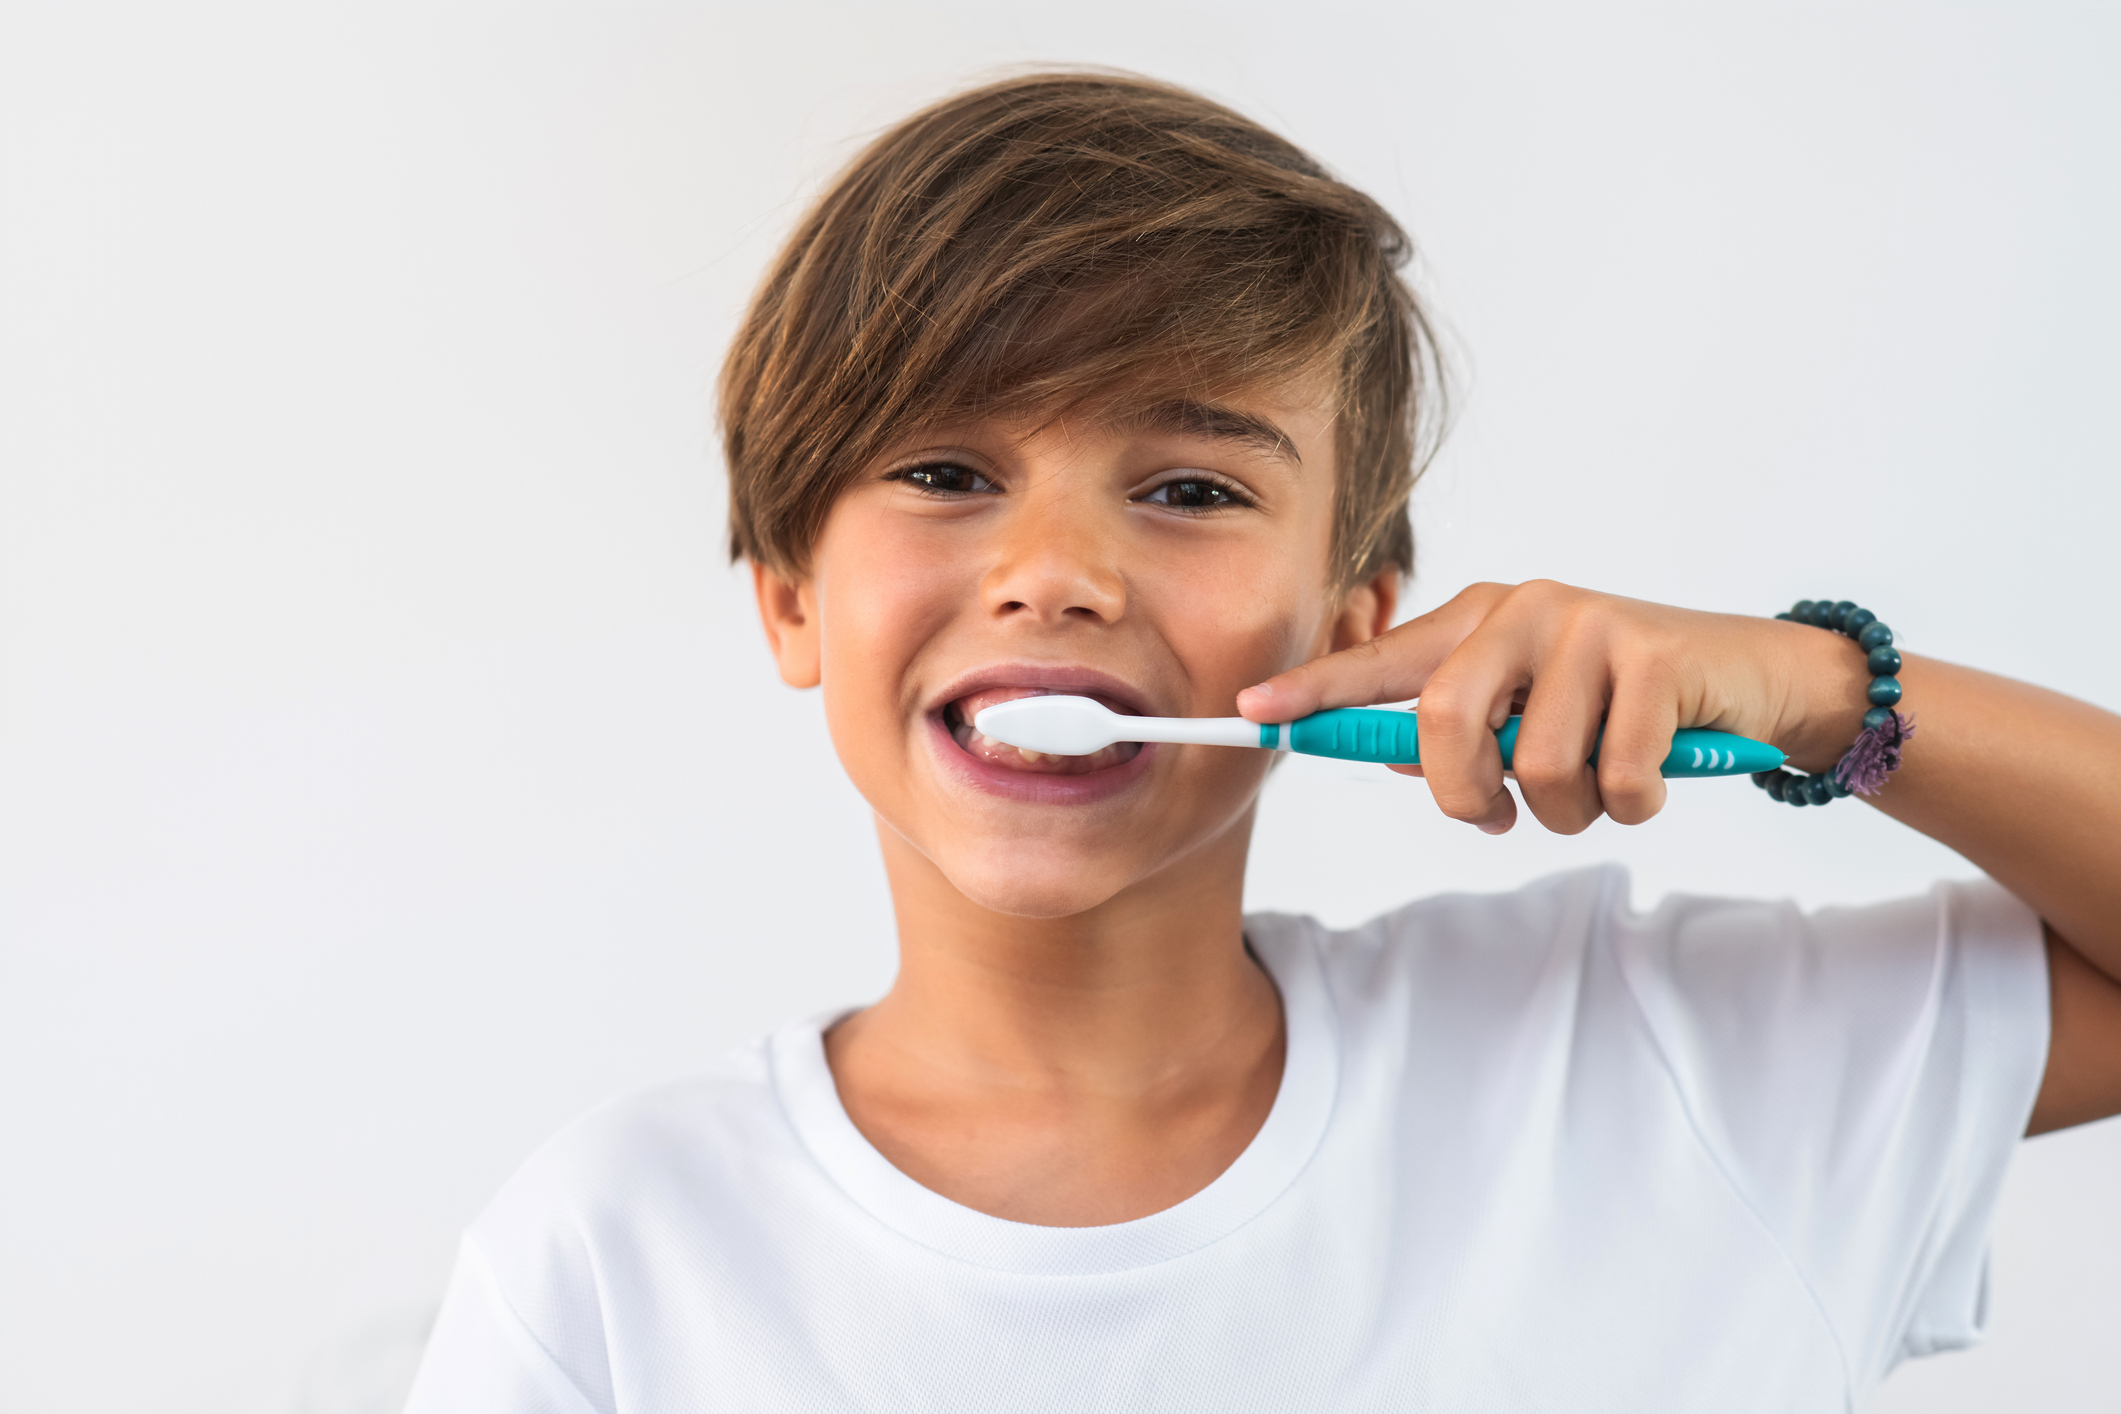 One of the preventive measures is good oral hygiene.